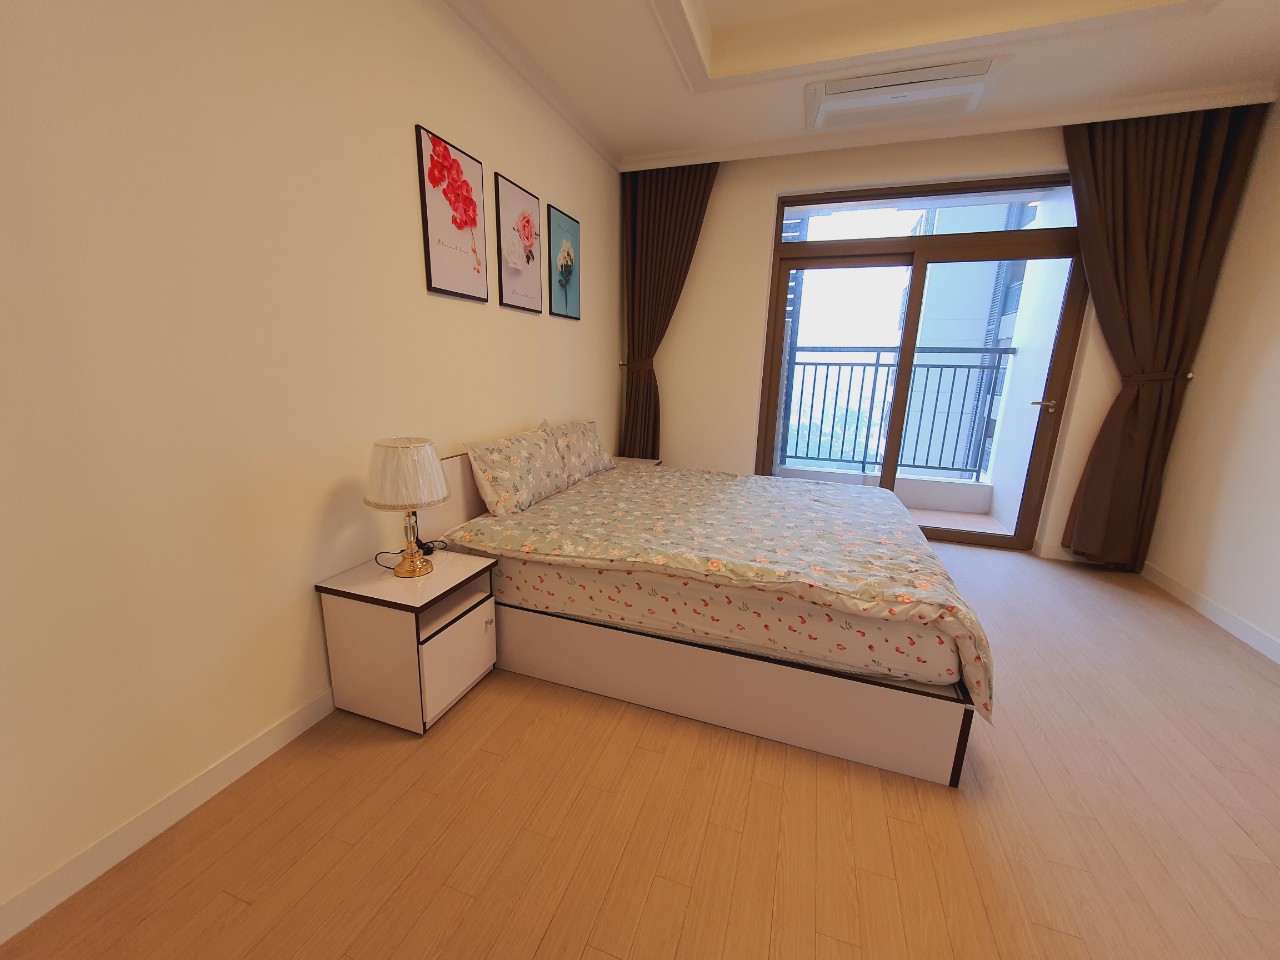 Newly furnished 3 bedroom apartment for rent in Starlake urban area 4